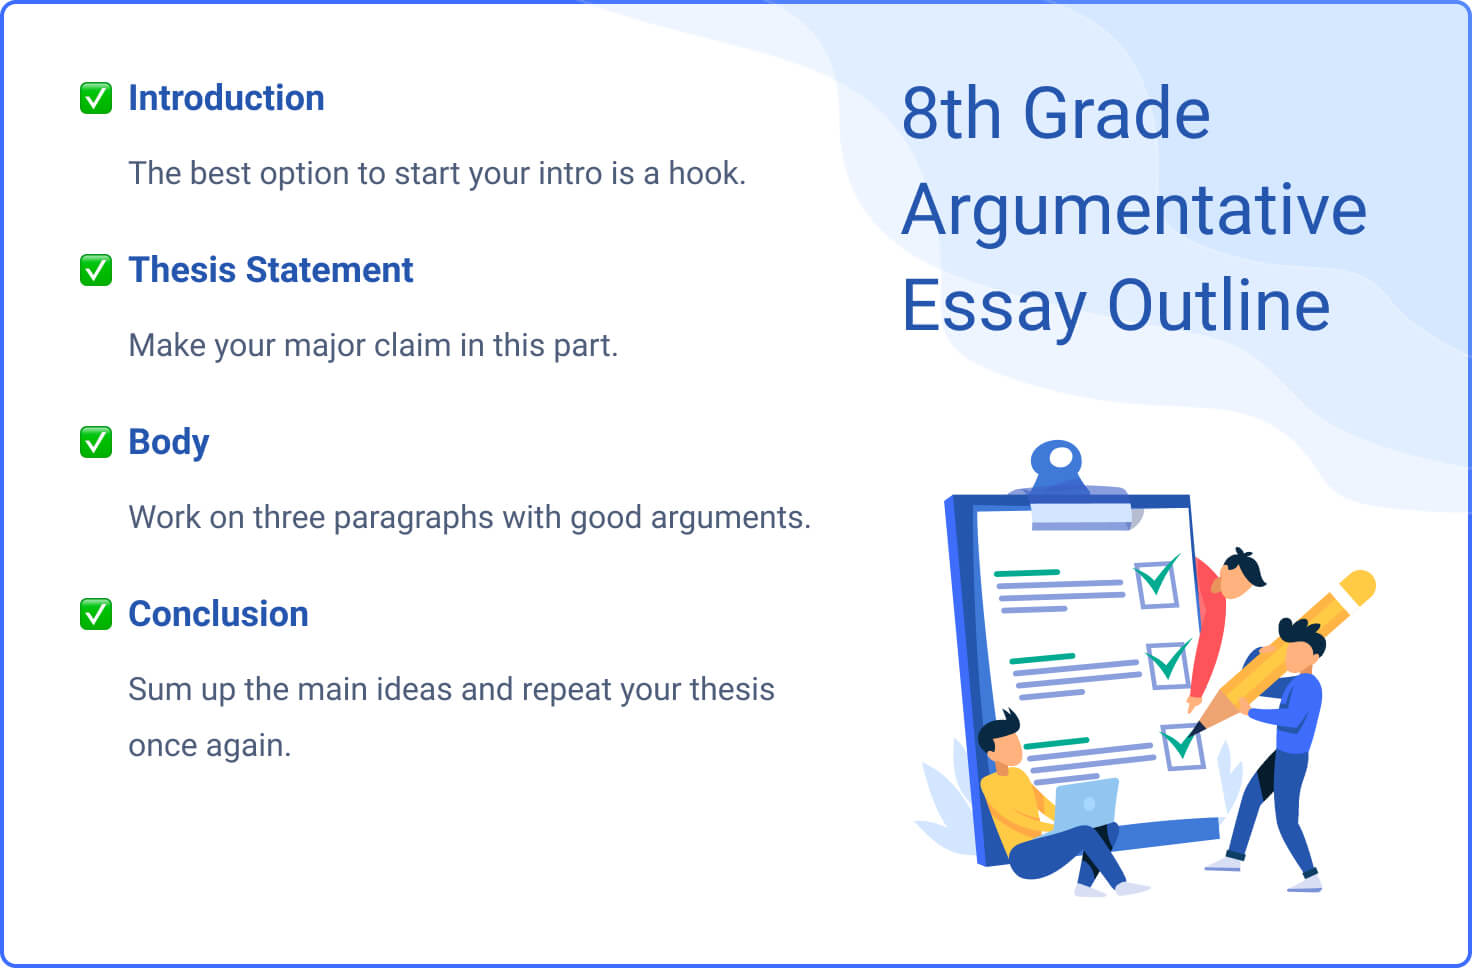 The picture contains an exemplary outline for an 8th grade argumentative essay.